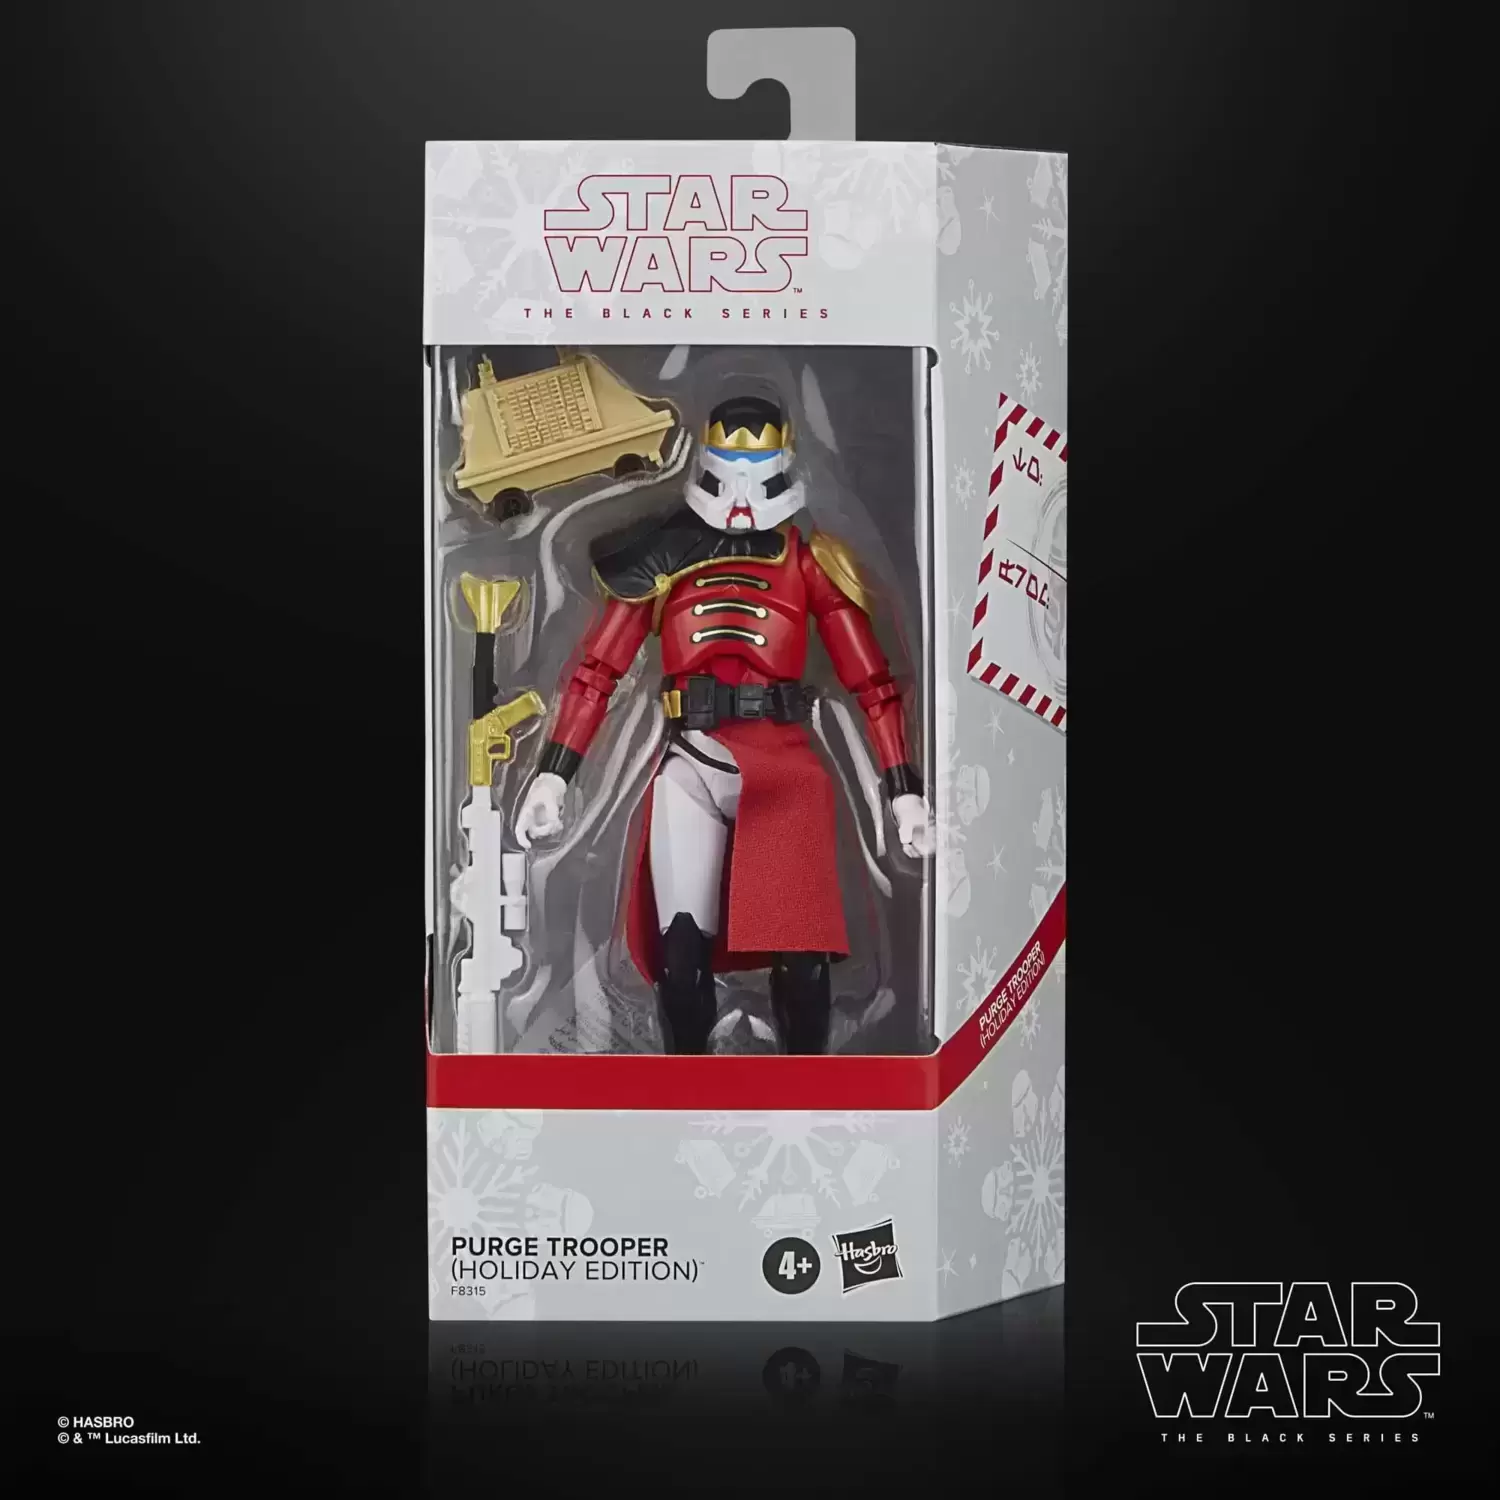 The Black Series - Holiday Edition - Purge Trooper (Holiday Edition)